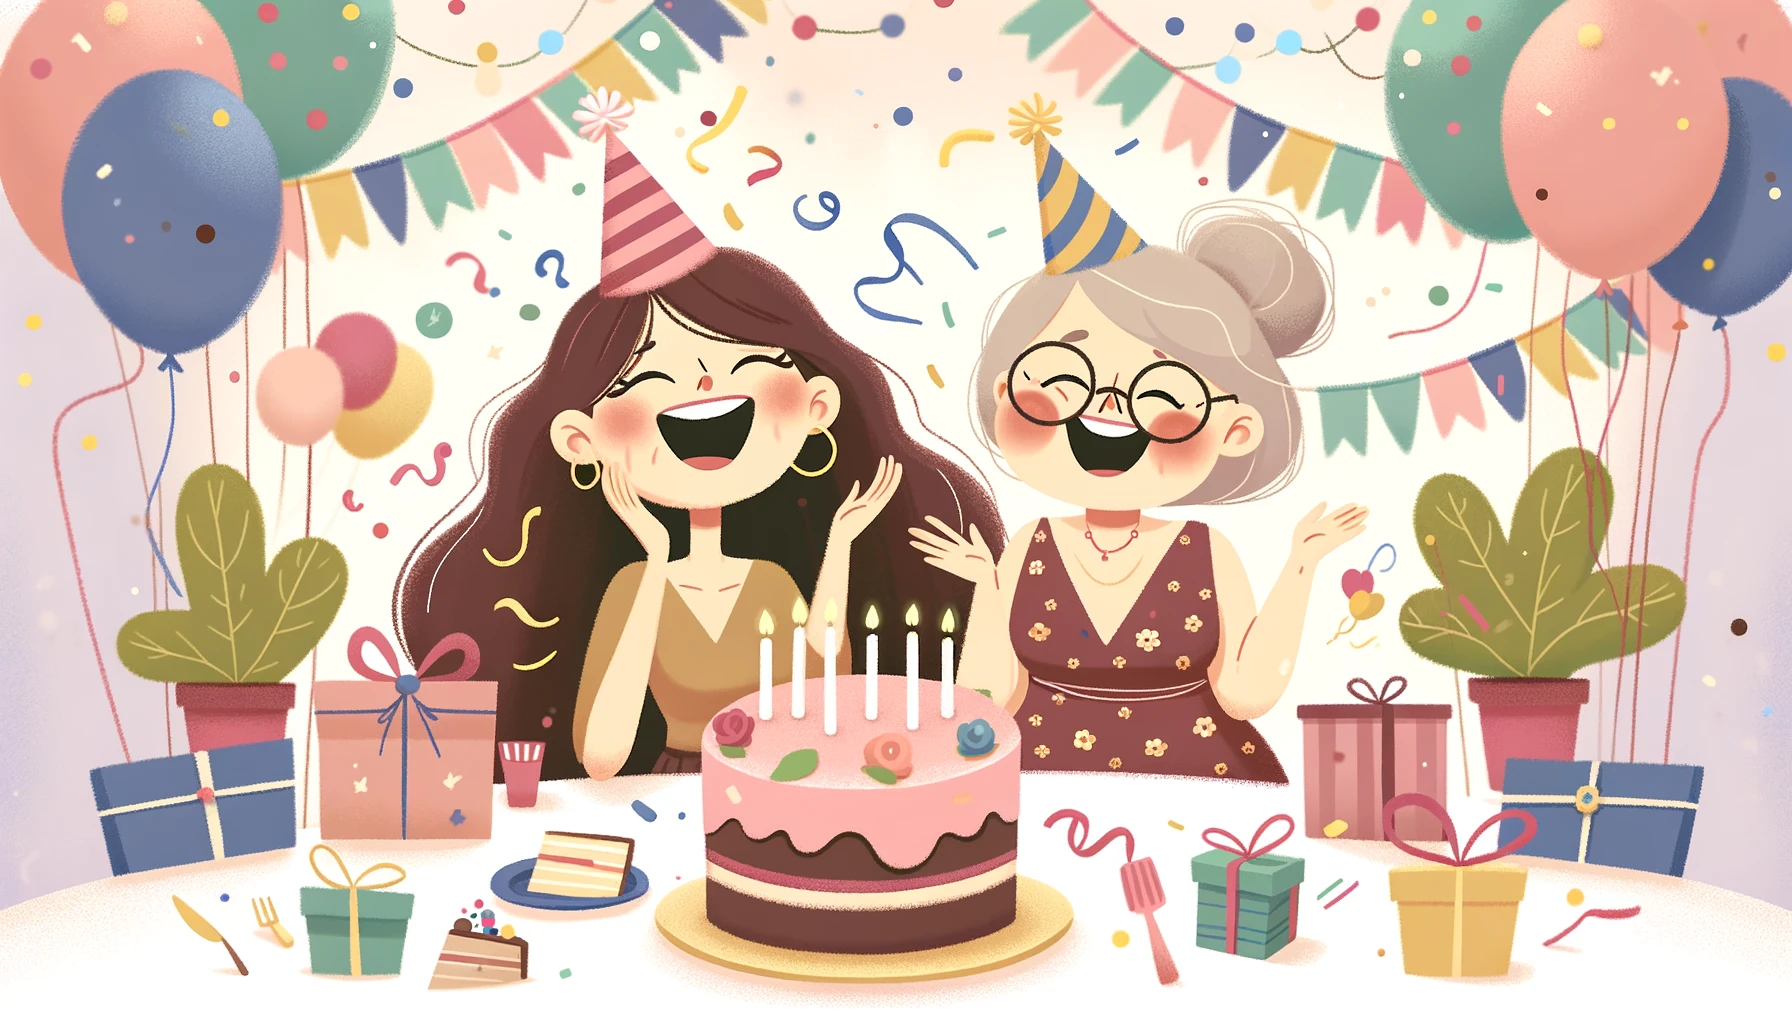 Short Birthday Wishes for a Woman from Another Woman